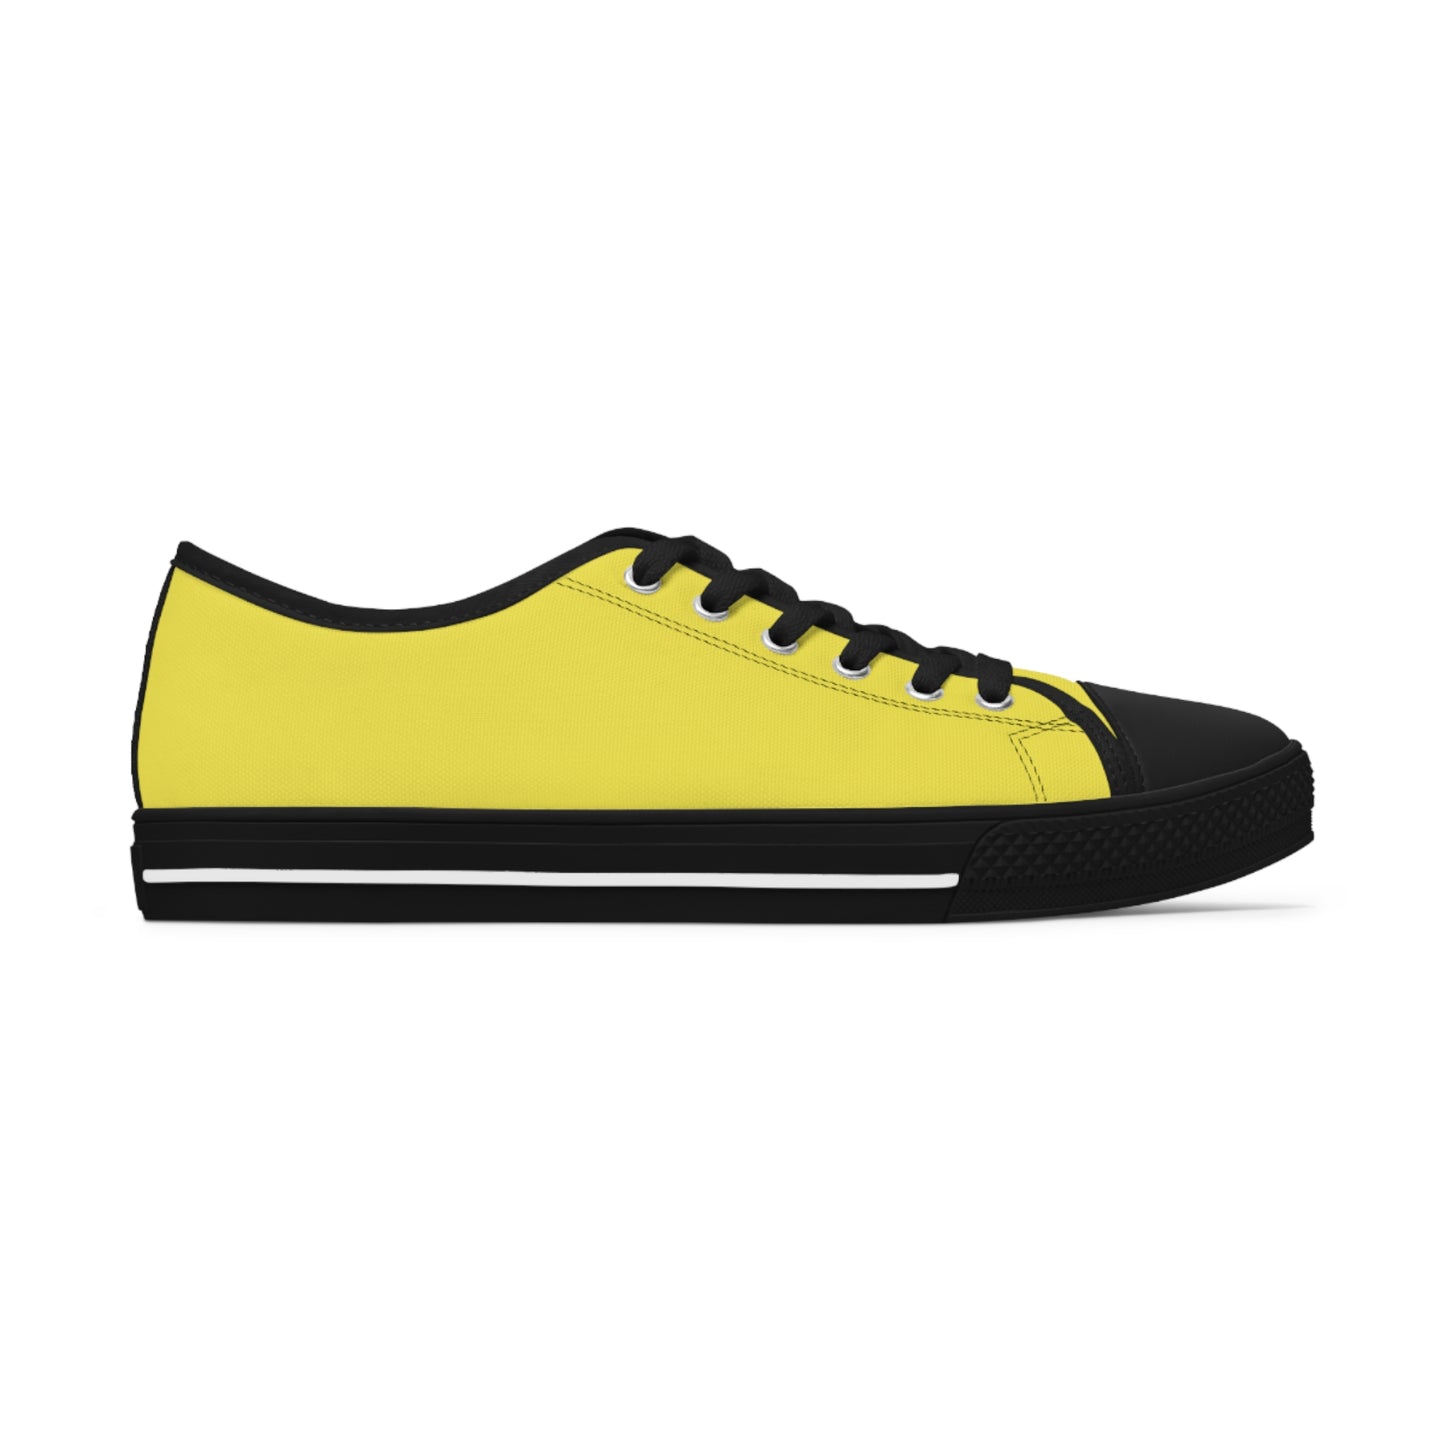 Women's Low Top Sneakers - Yellow US 12 White sole